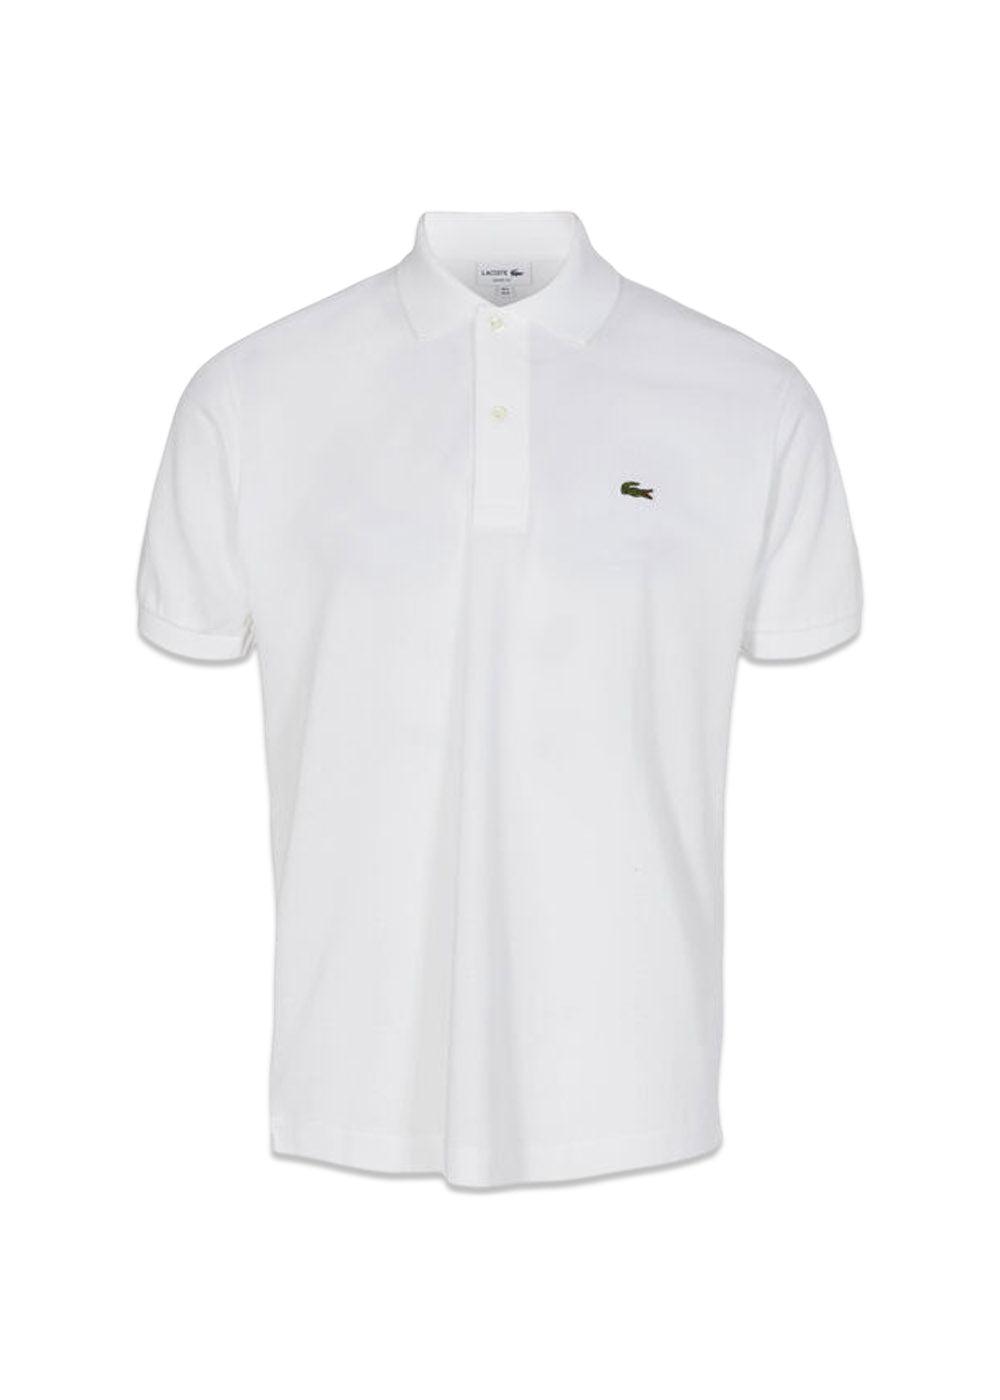 Classic Fit Short Sleeved Ribbed Collar shirt - White